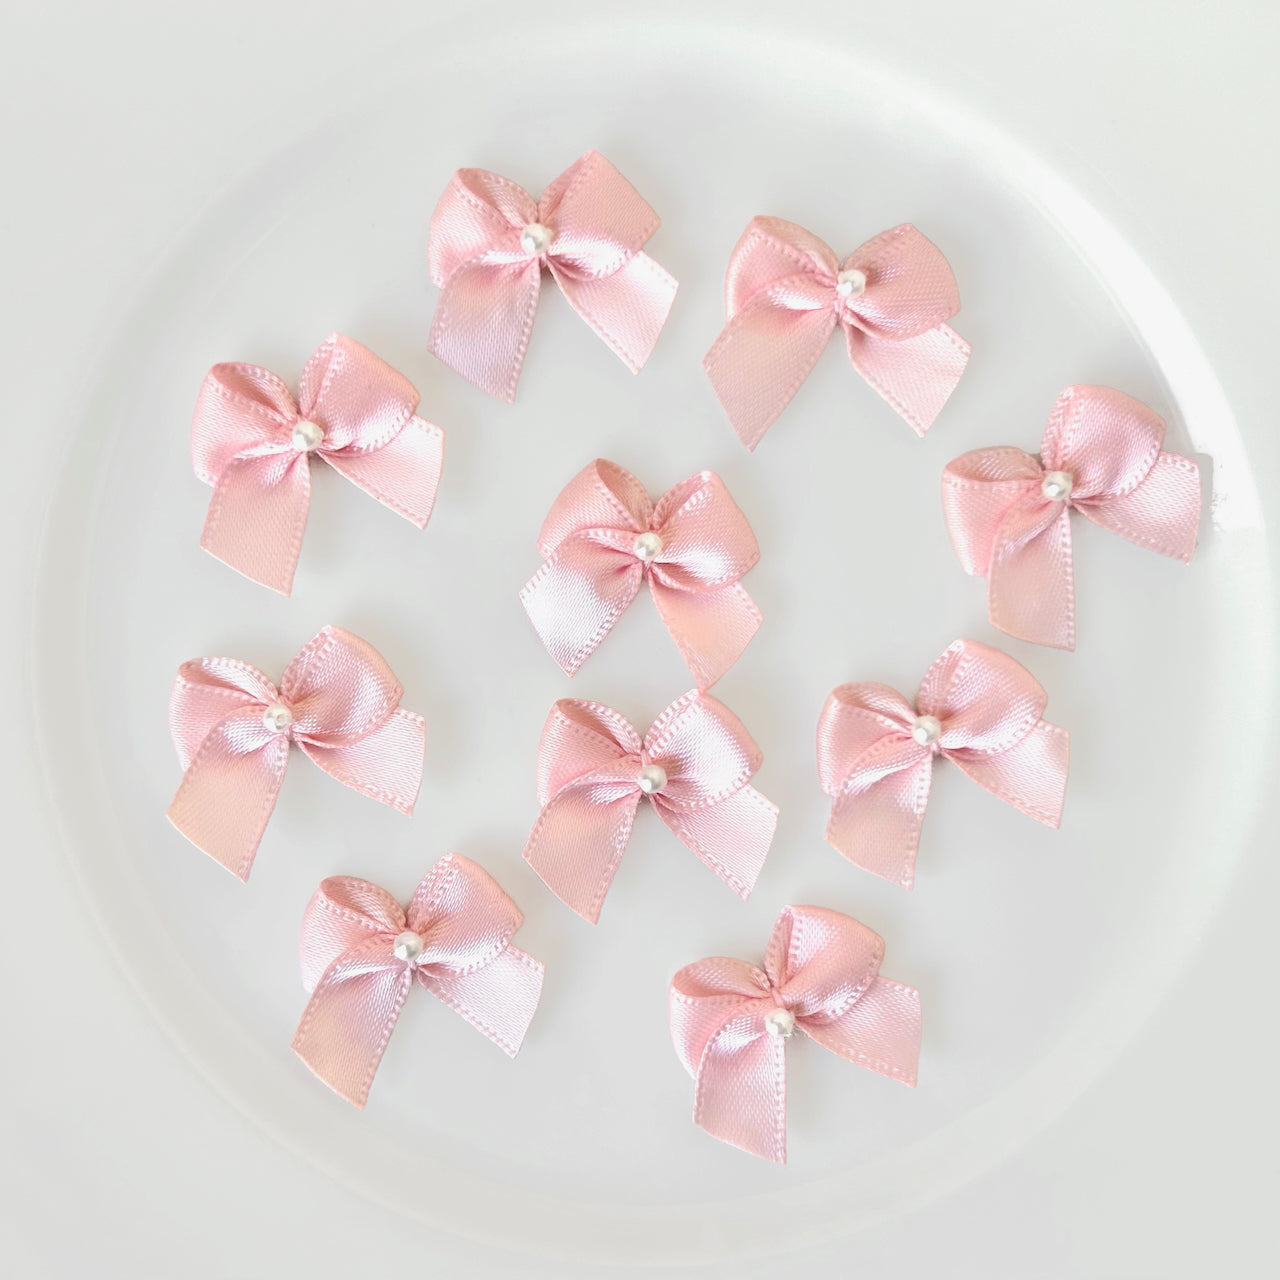 Little Satin Bows With Pearl Center - Vintage - Multiple Colors